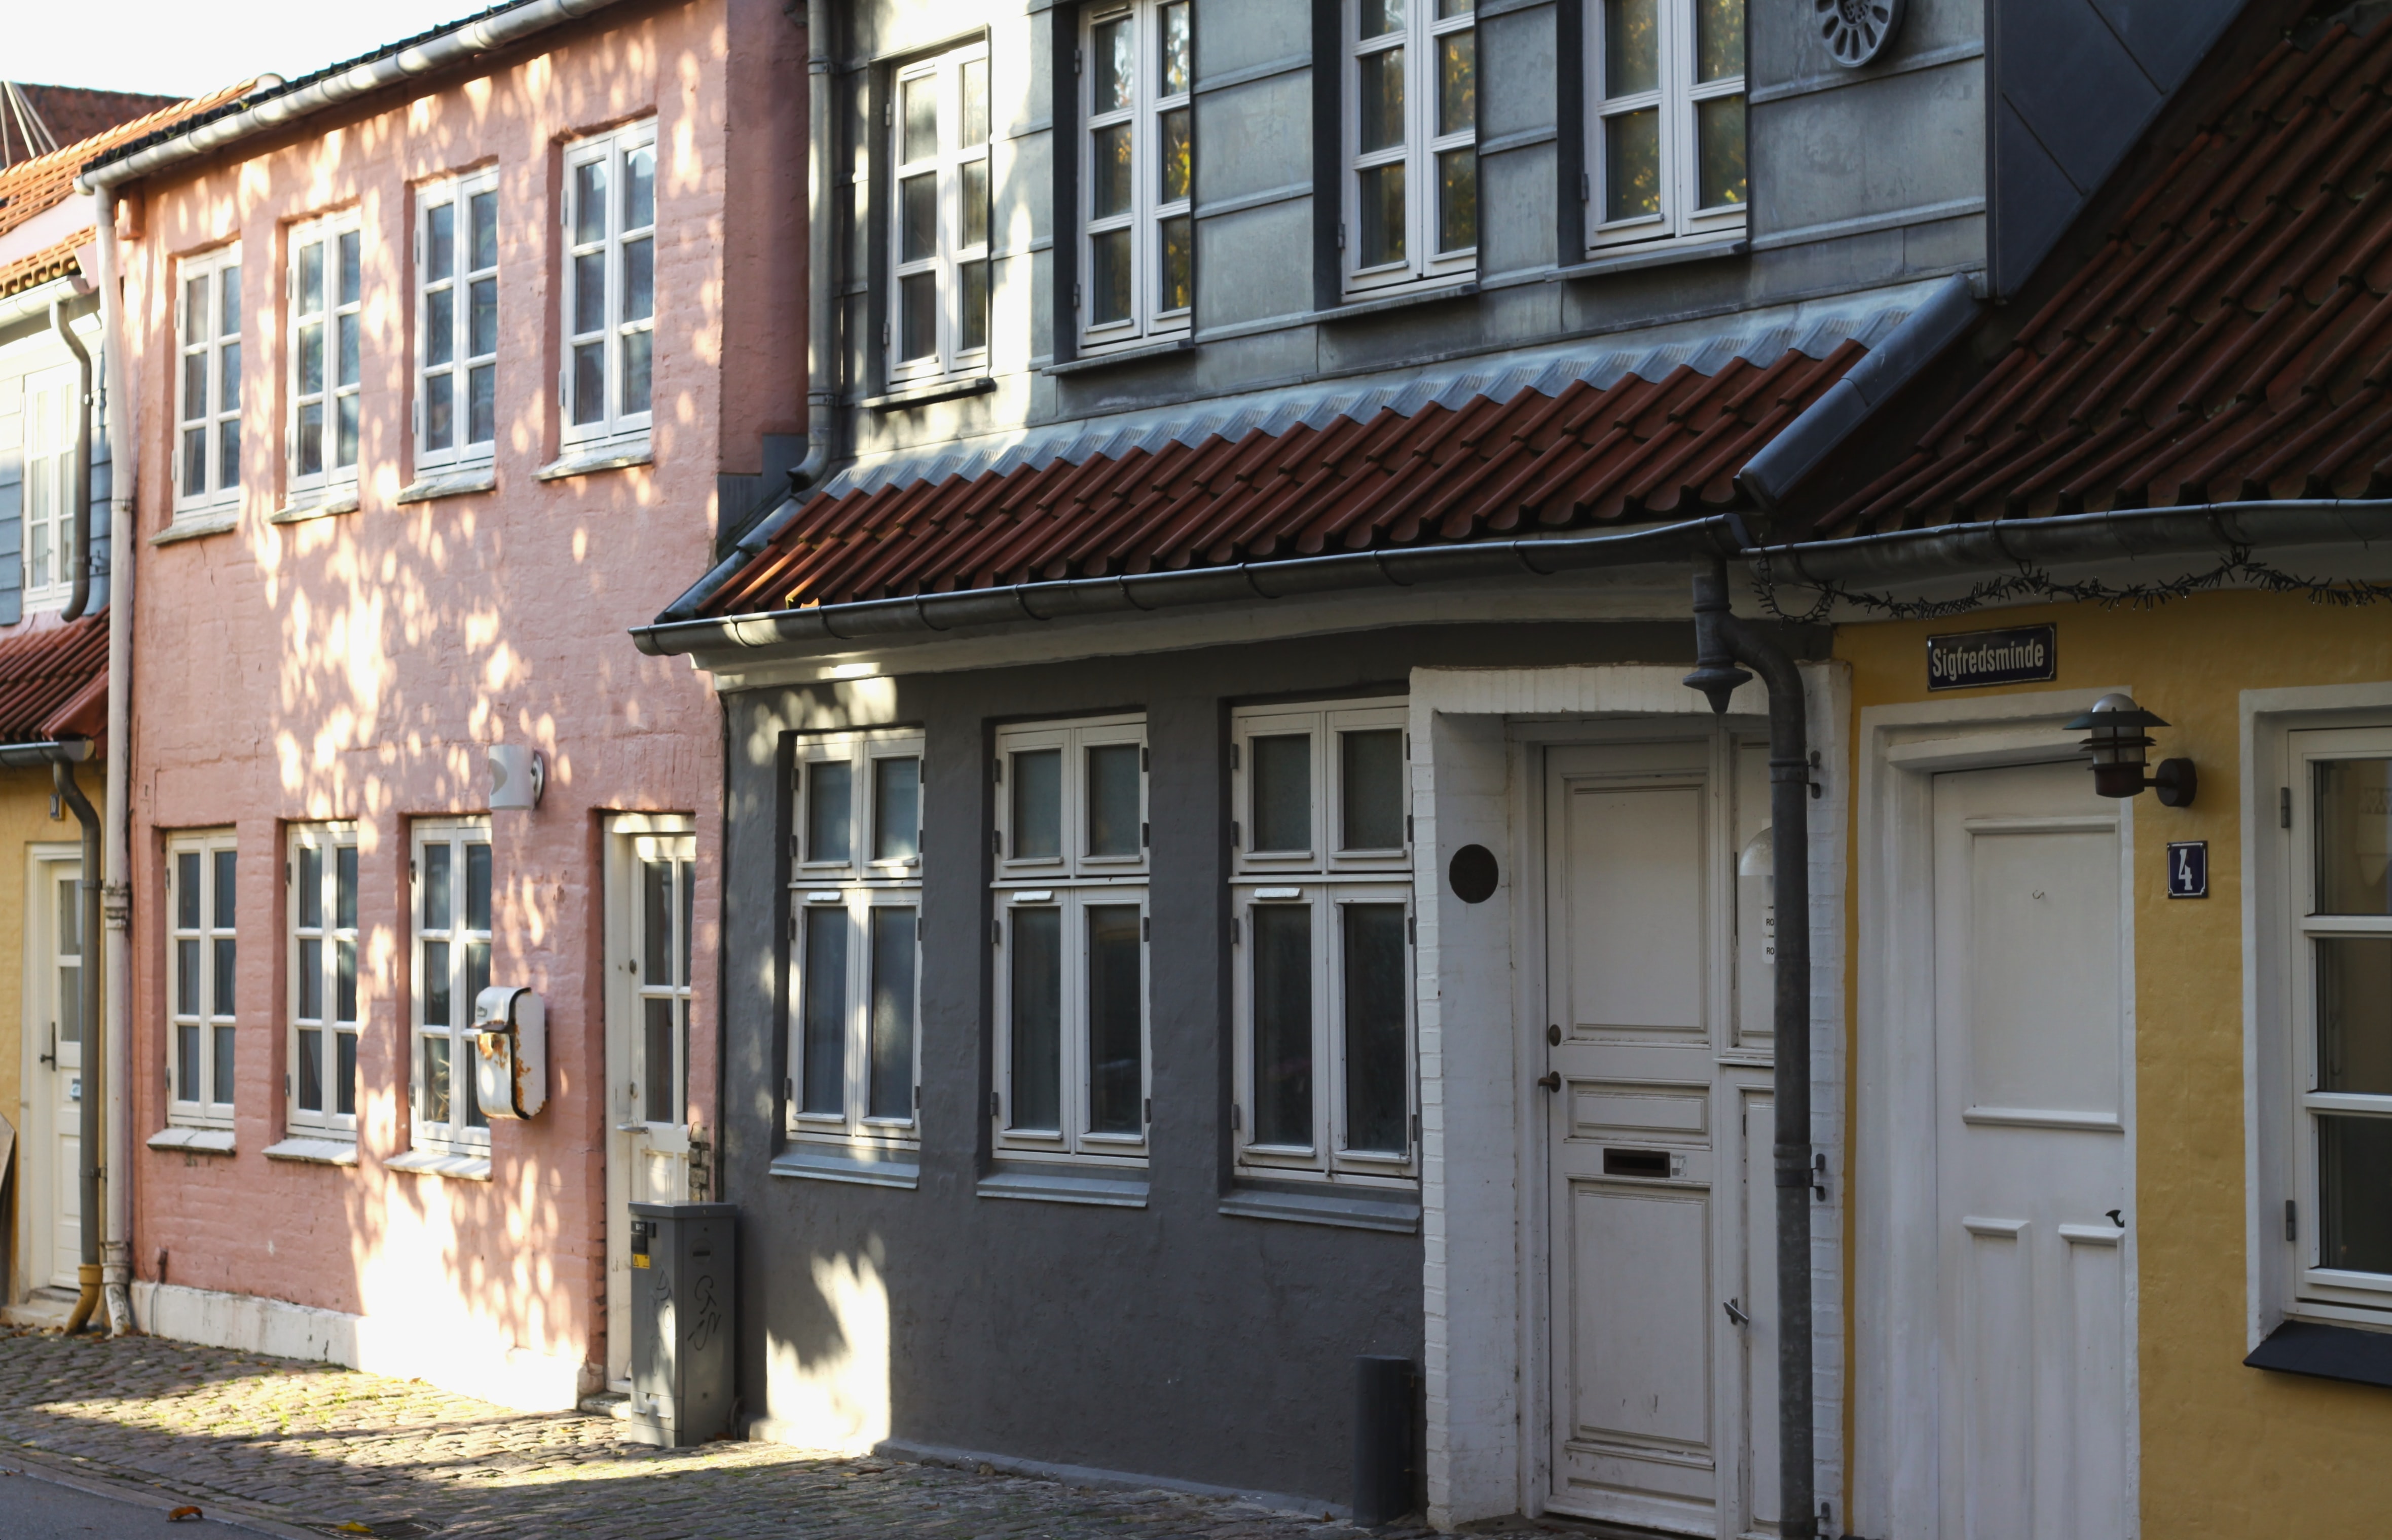 Purchase of property in Denmark as Expat